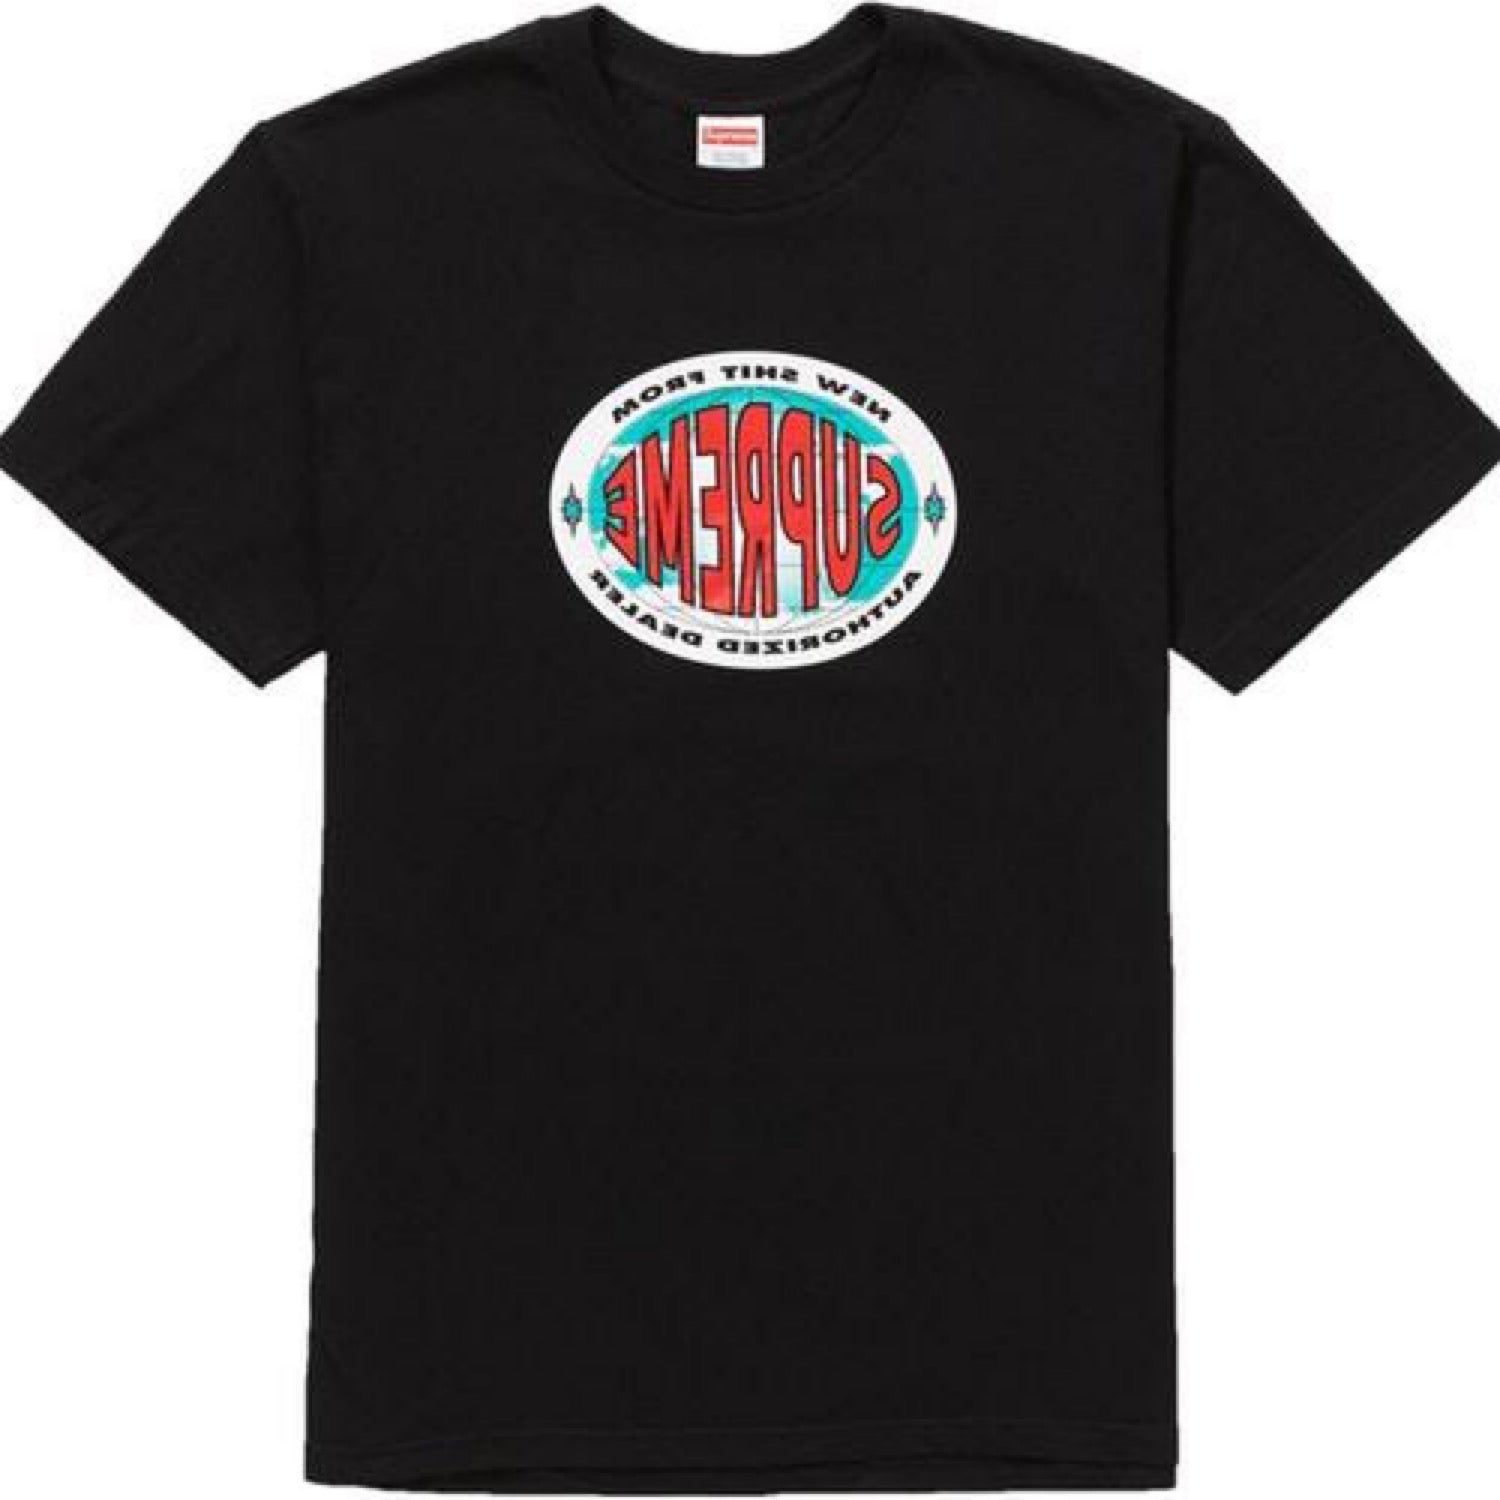 Supreme new shit tee black - Centrall Online